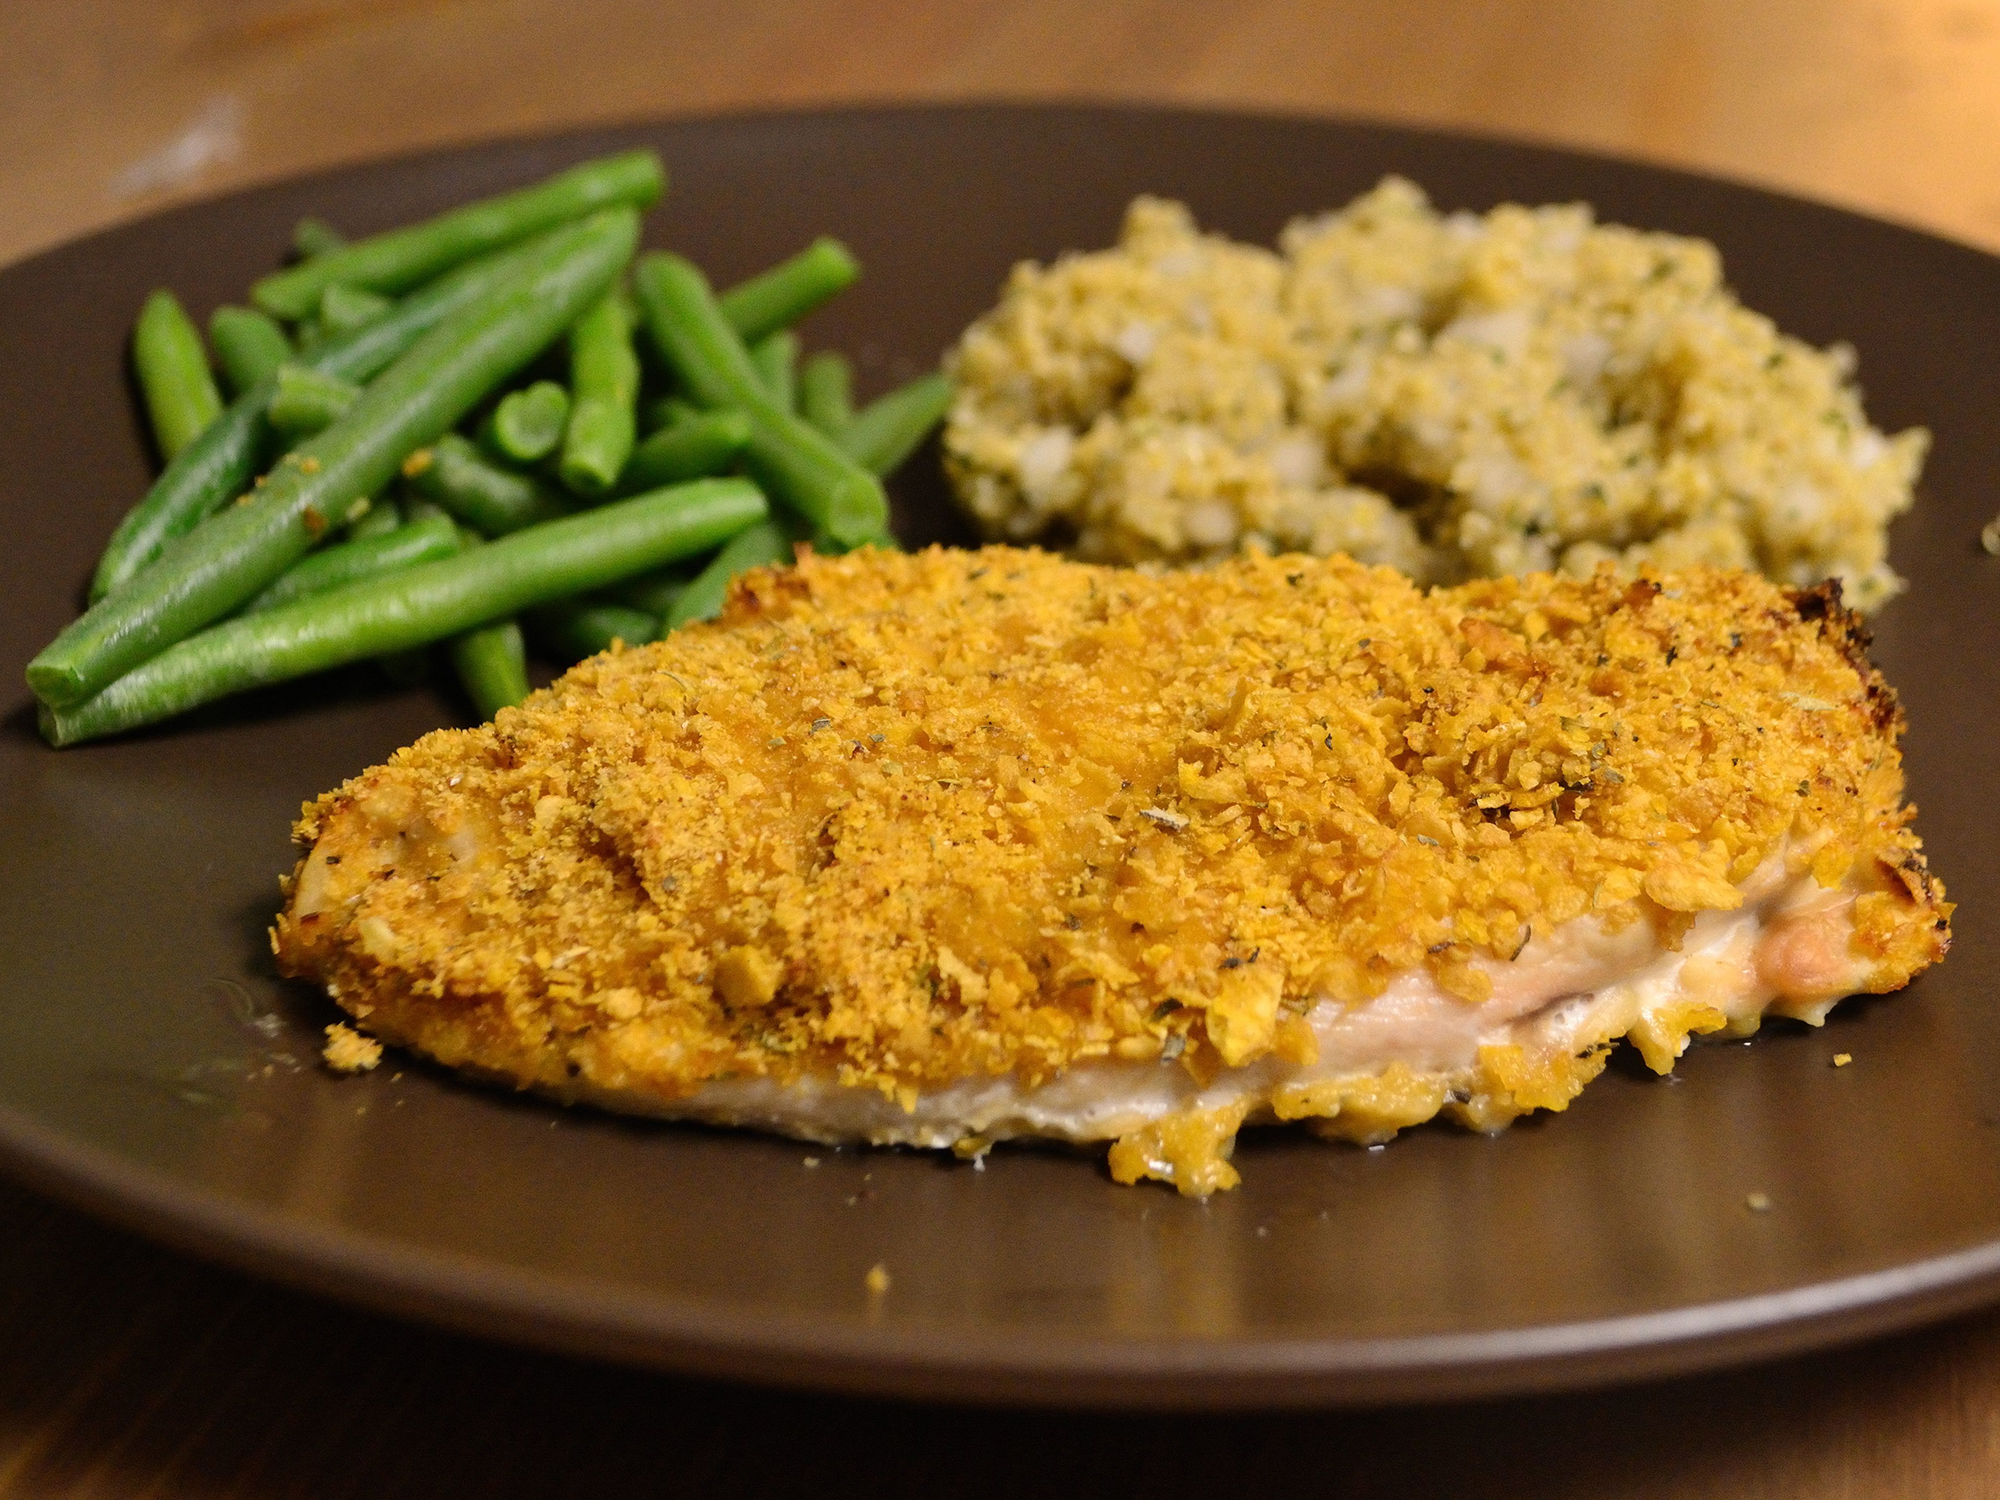 close up view of a fillet of breaded chicken served with green beans and rice on a plate